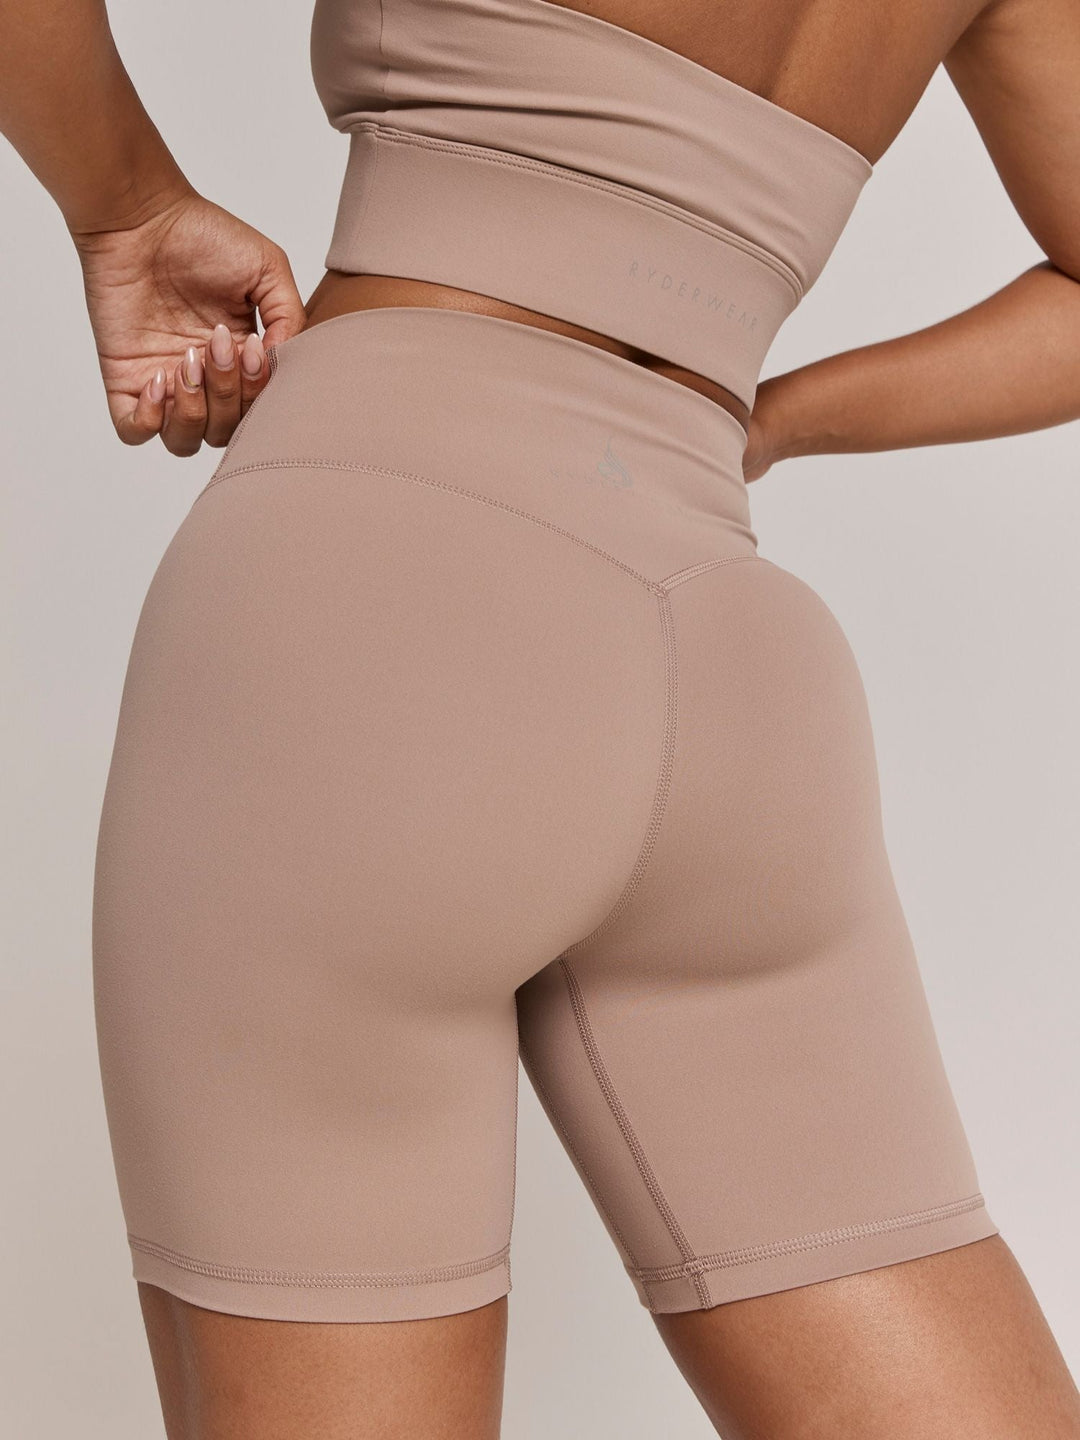 NKD Arch Mid-Length Shorts - Taupe Clothing Ryderwear 